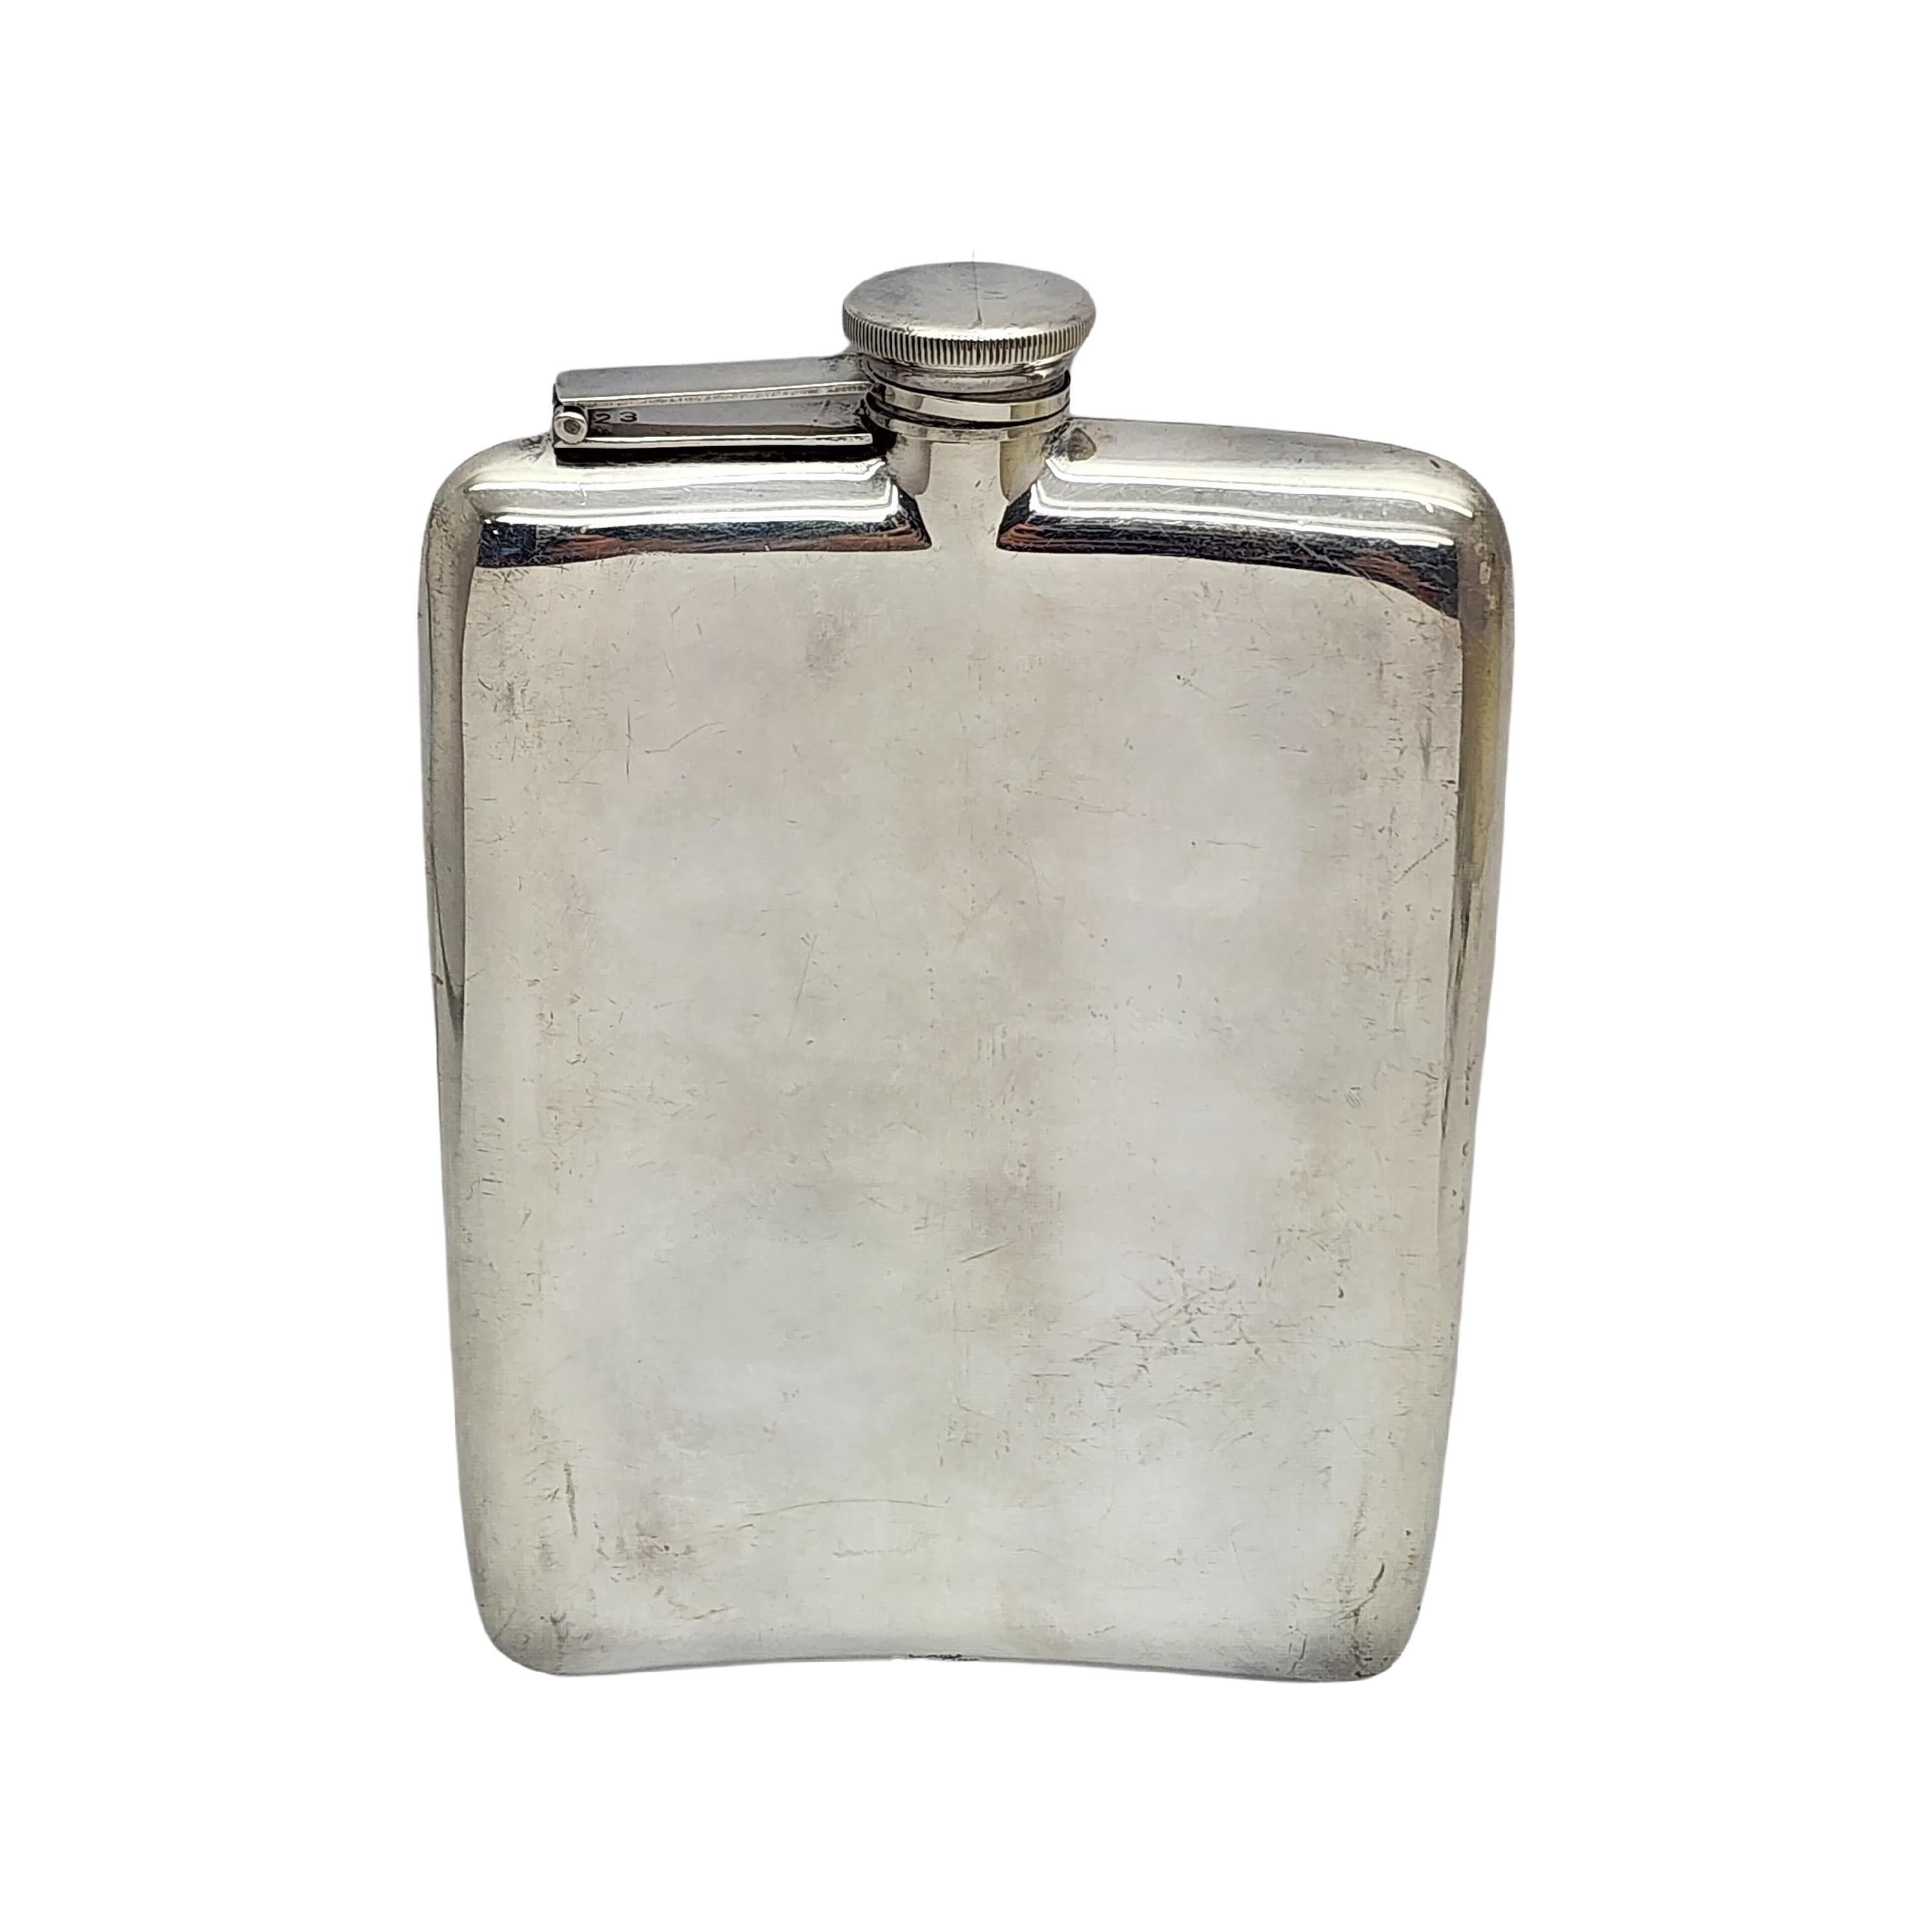 Sterling silver hip flask by EAM, Elgin American Manufacturing Co, with monogram.

Monogram appears to be BAM

Curved hip flask featuring alternating etched stripes and a smooth polished finish stripe on the front, a smooth polished finish on the